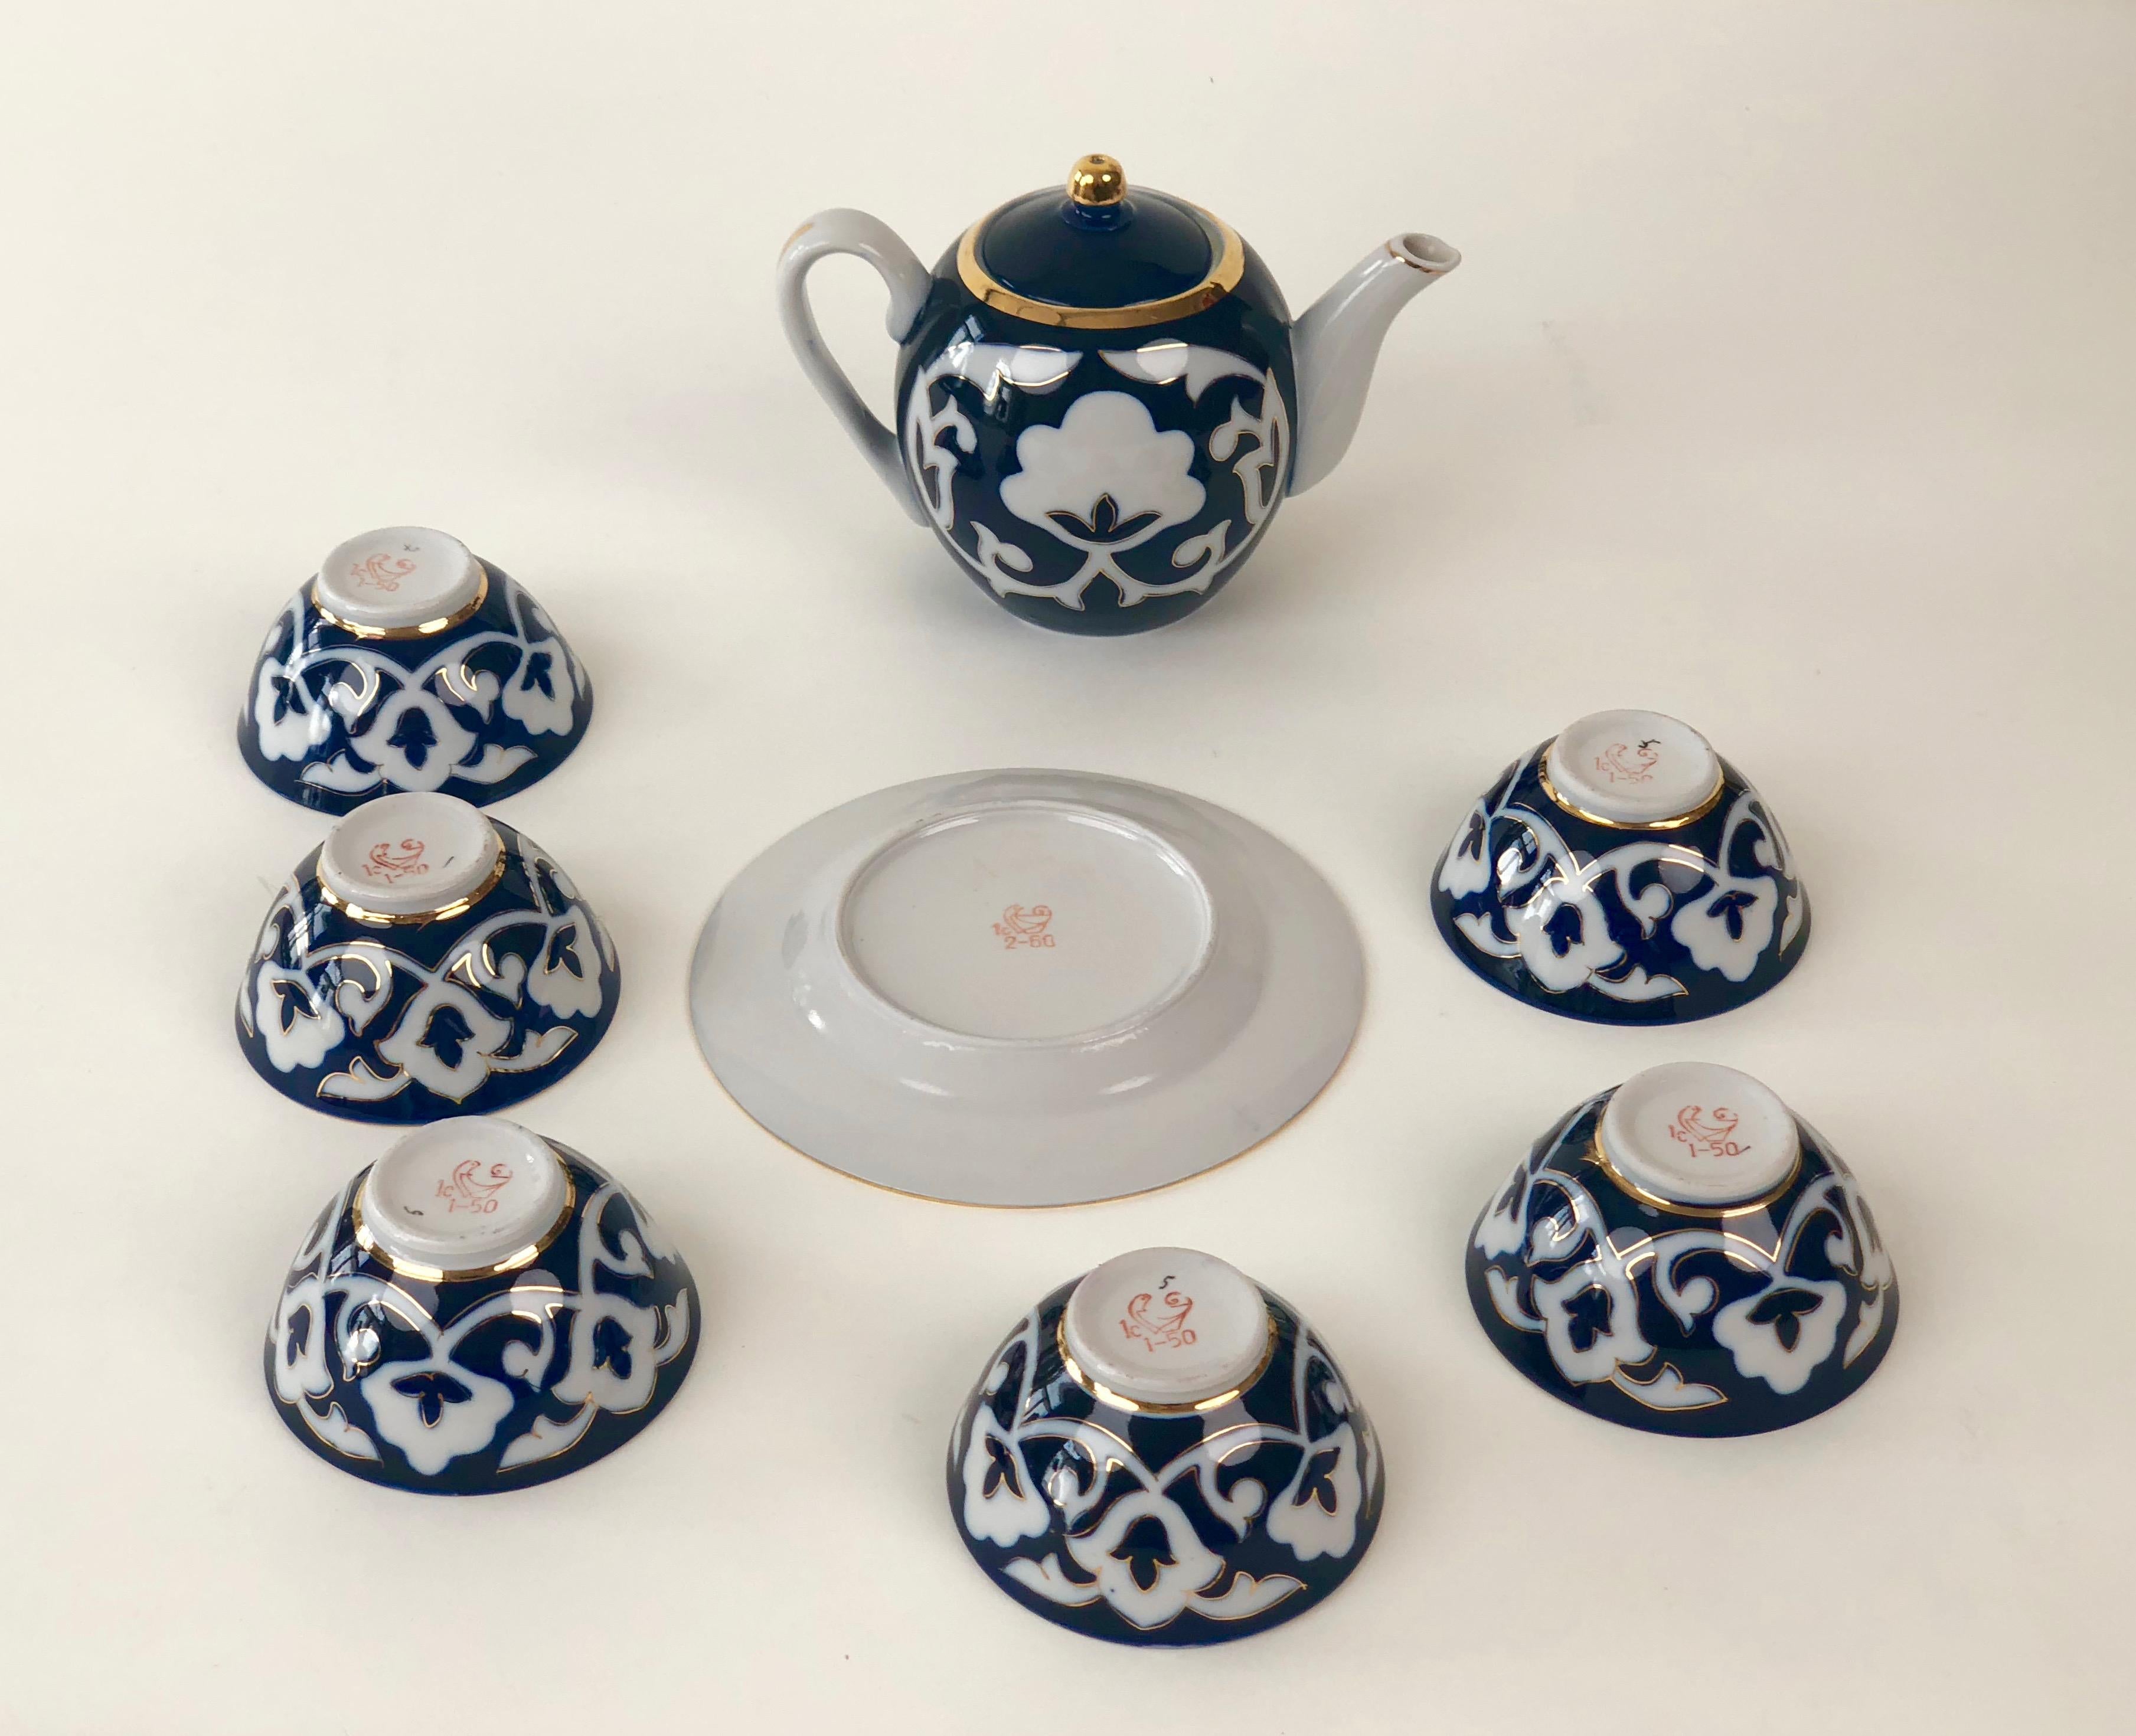 Porcelain tea set from Central Asia, that consist of 6 small tea bowls, a tea pot and one plate for cookies.
The traditional floral pattern is in cobalt blue glaze, the hand painted details are in massive gold.

All pieces are in excellent